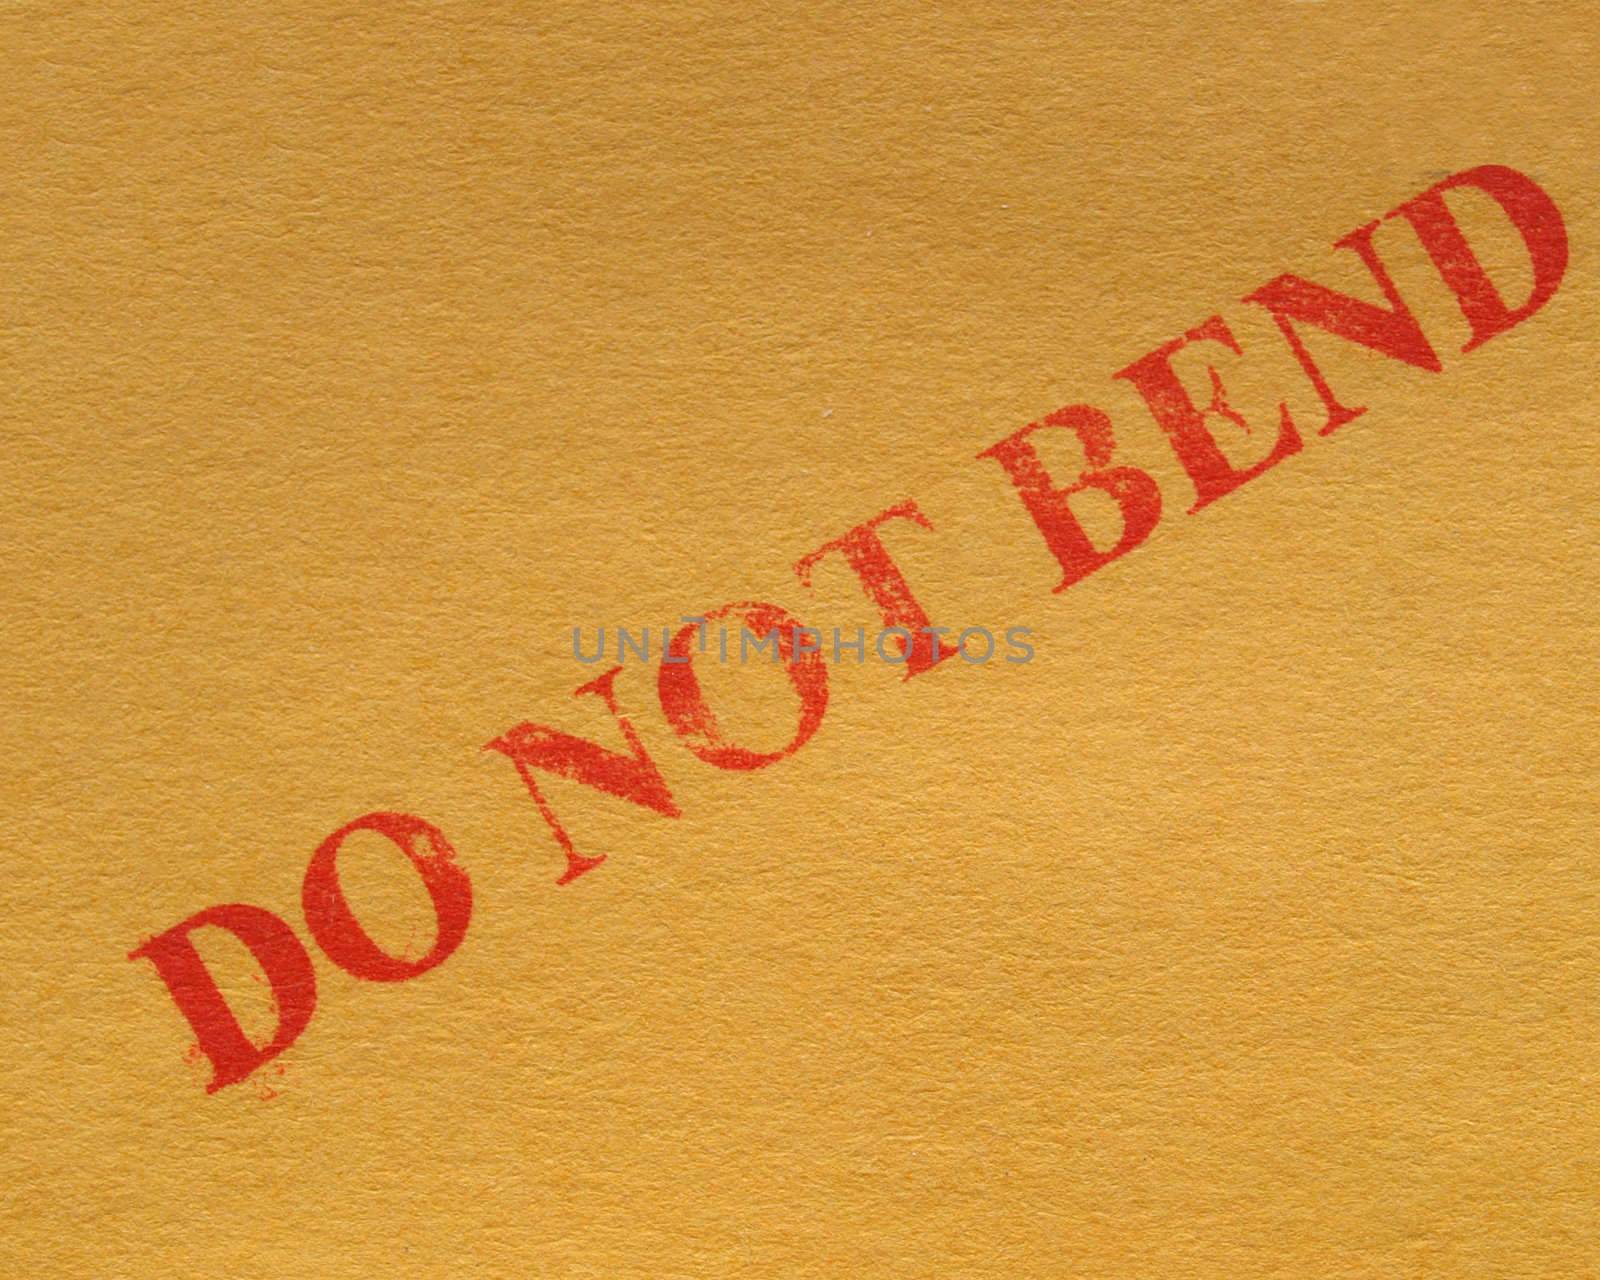 do not bend - red ink warning over a brown cardboard box